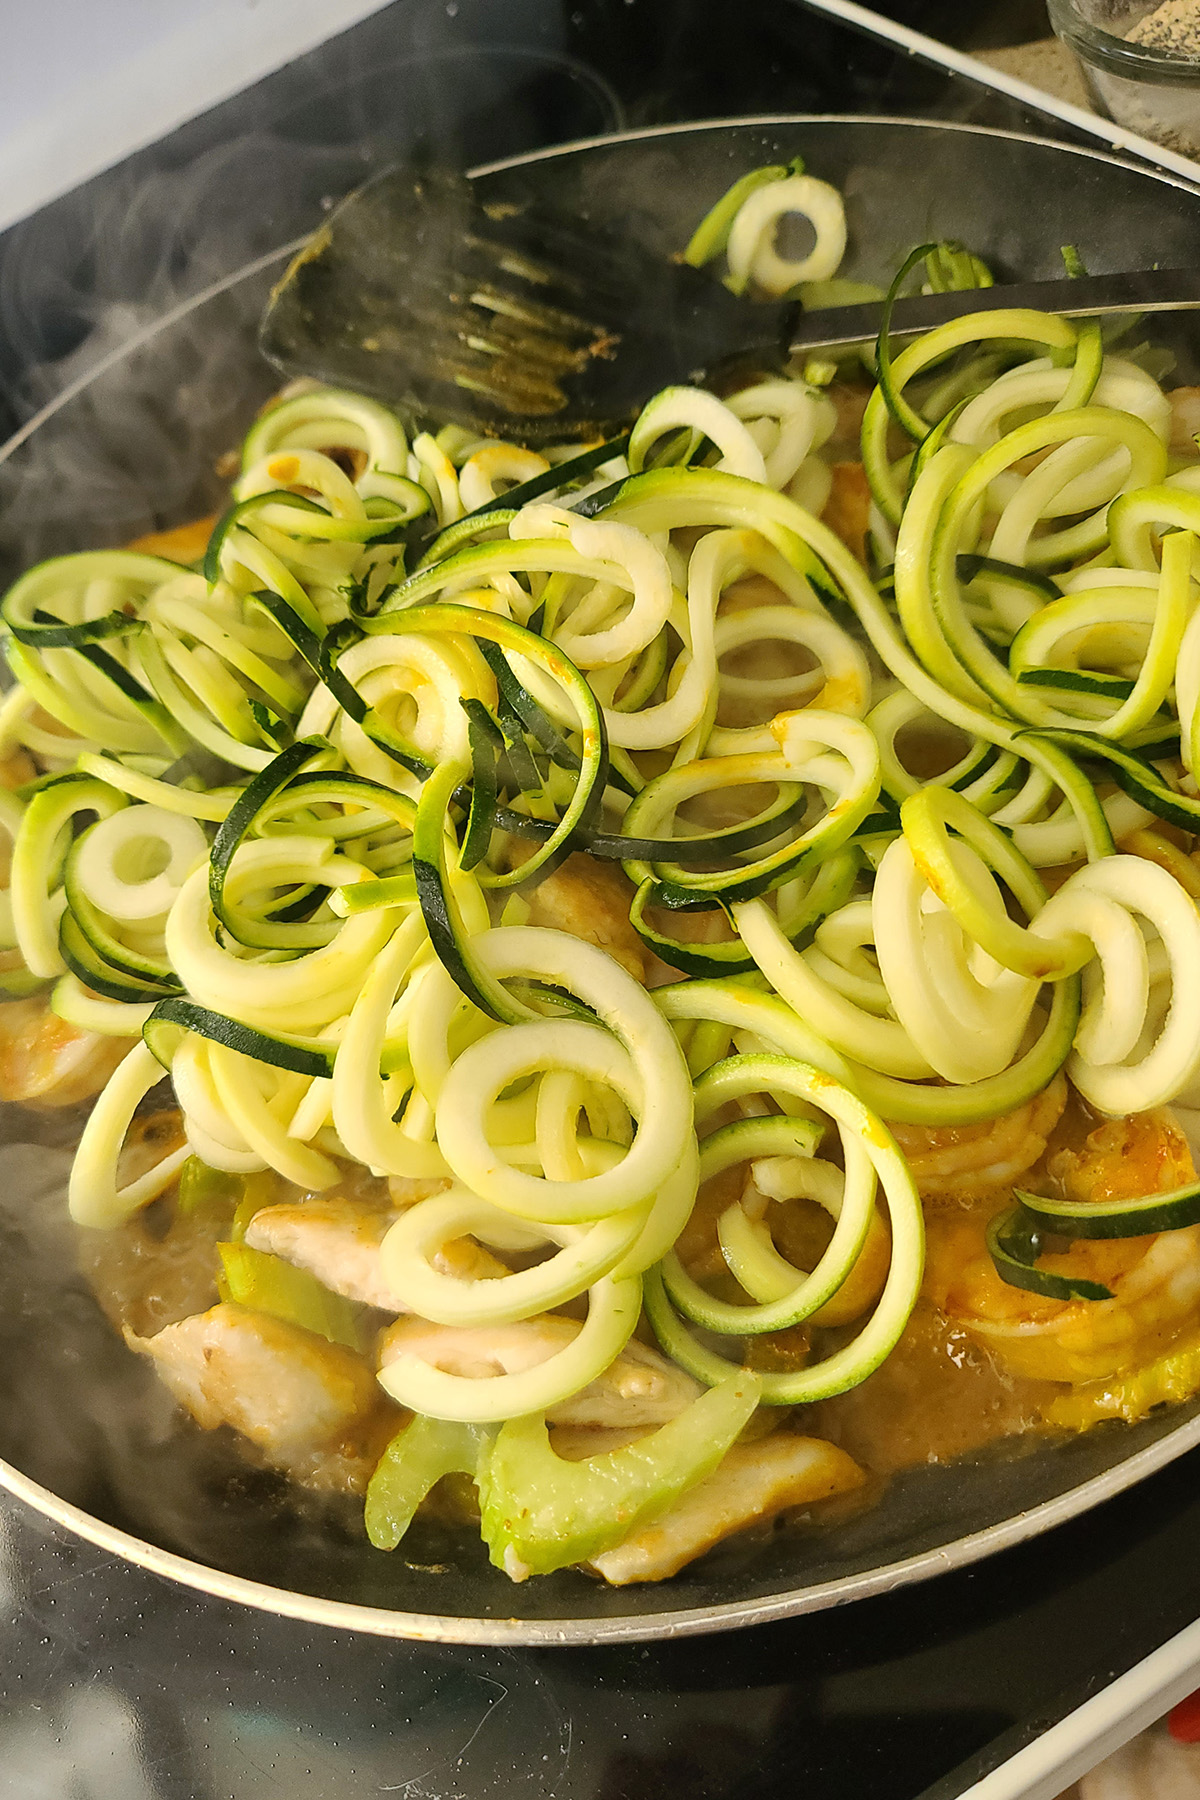 Zoodles being cooked in the sauce.